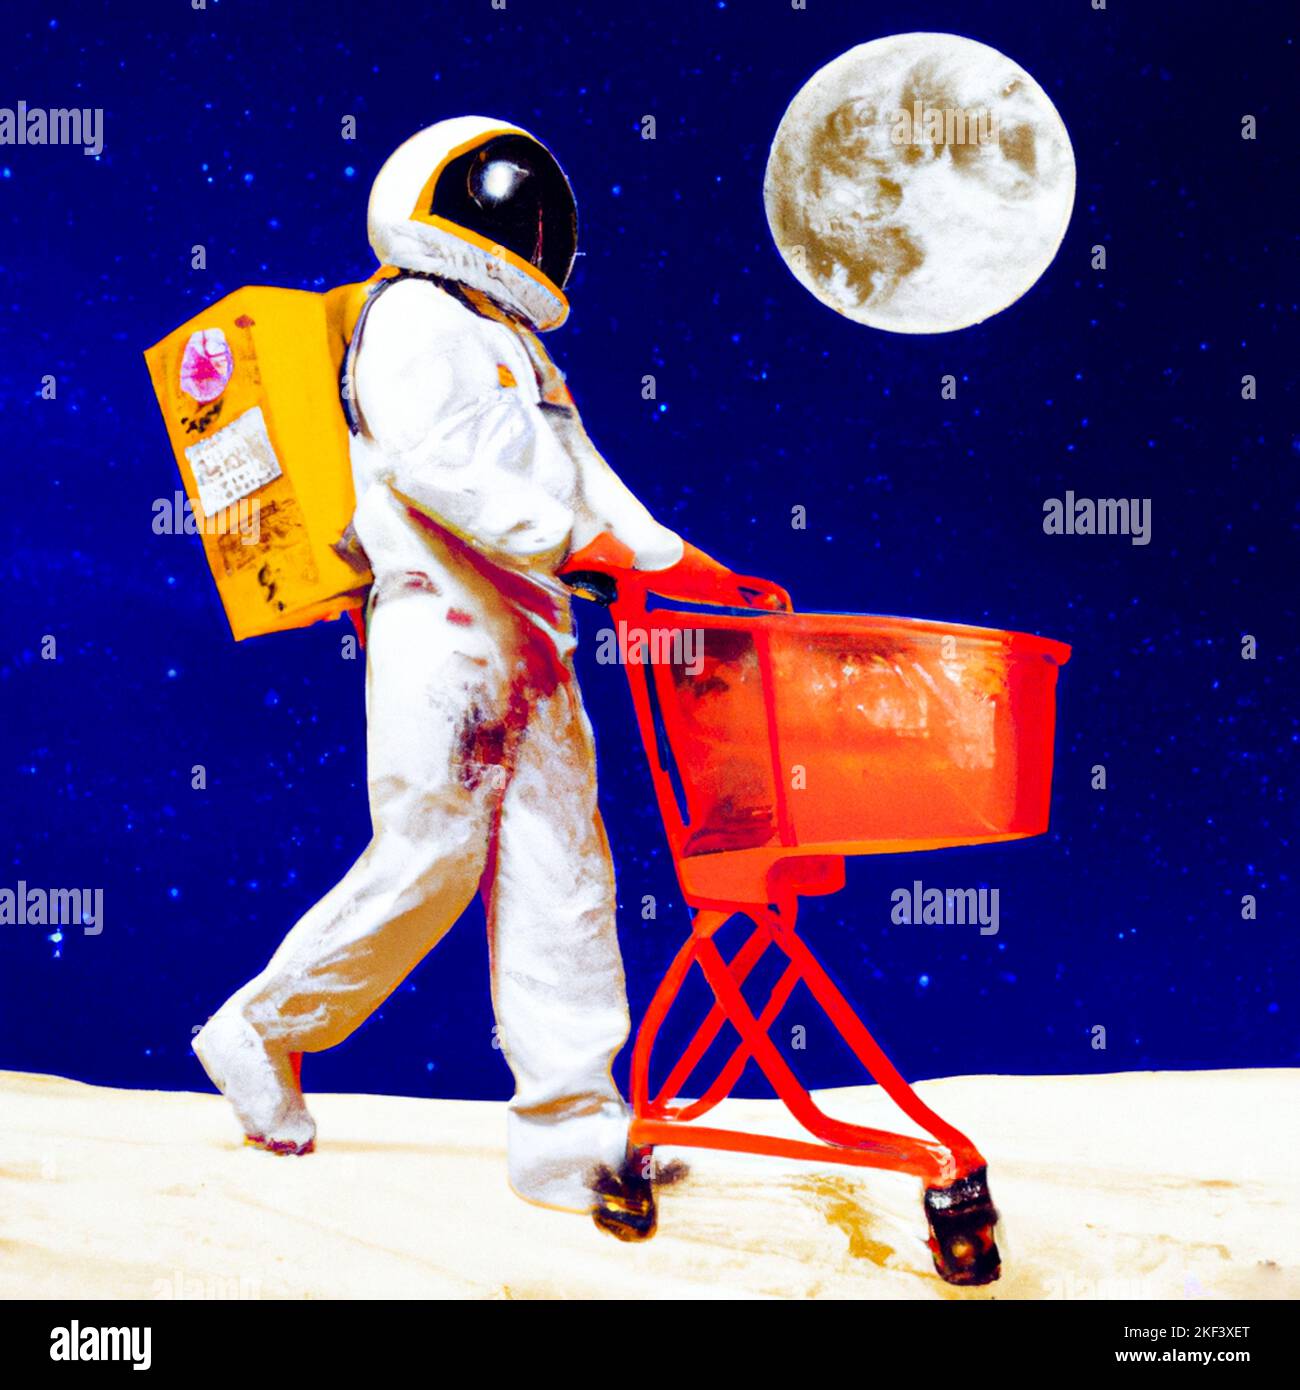 France, Paris on 2022-11-06. Digital illustration of an astronaut with a shopping cart on the moon to evoke the theme of rising prices and inflation b Stock Photo